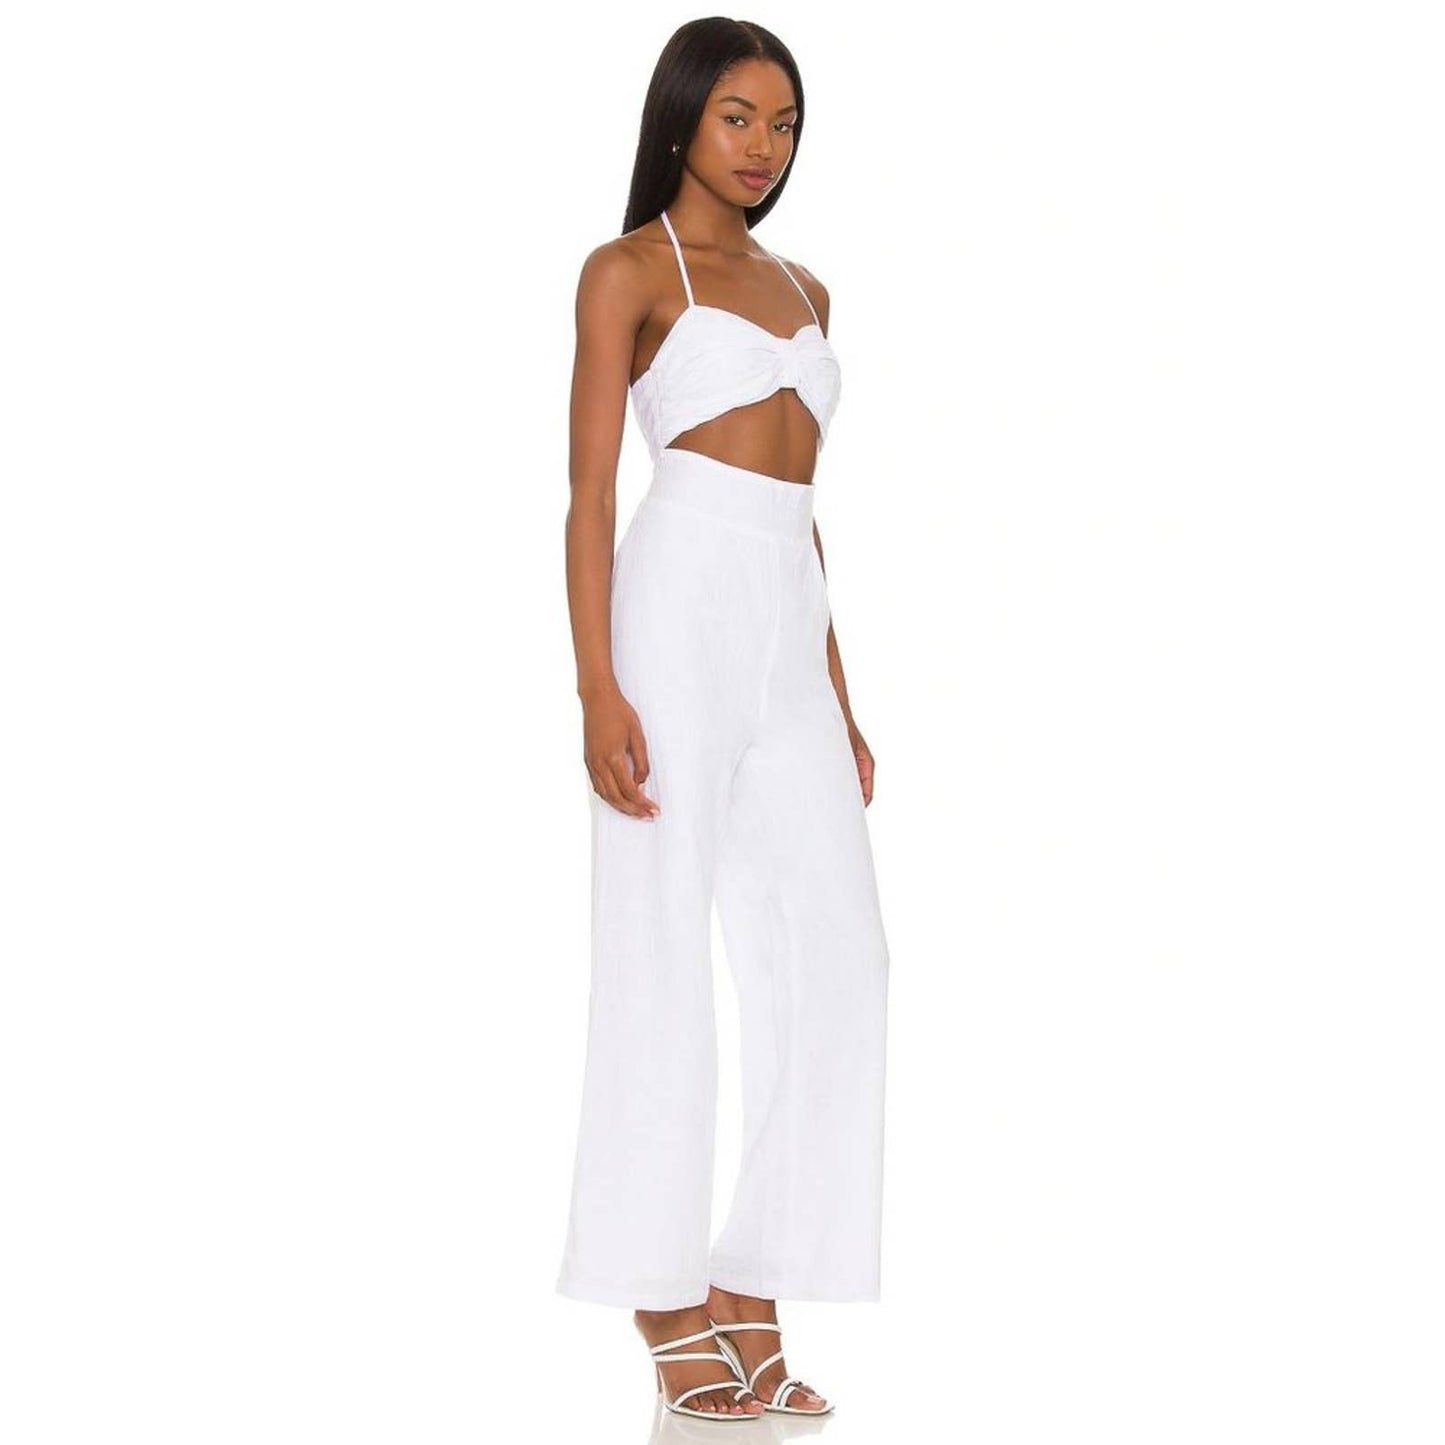 SNDYS Boat Linen Jumpsuit in White NWT Size Large